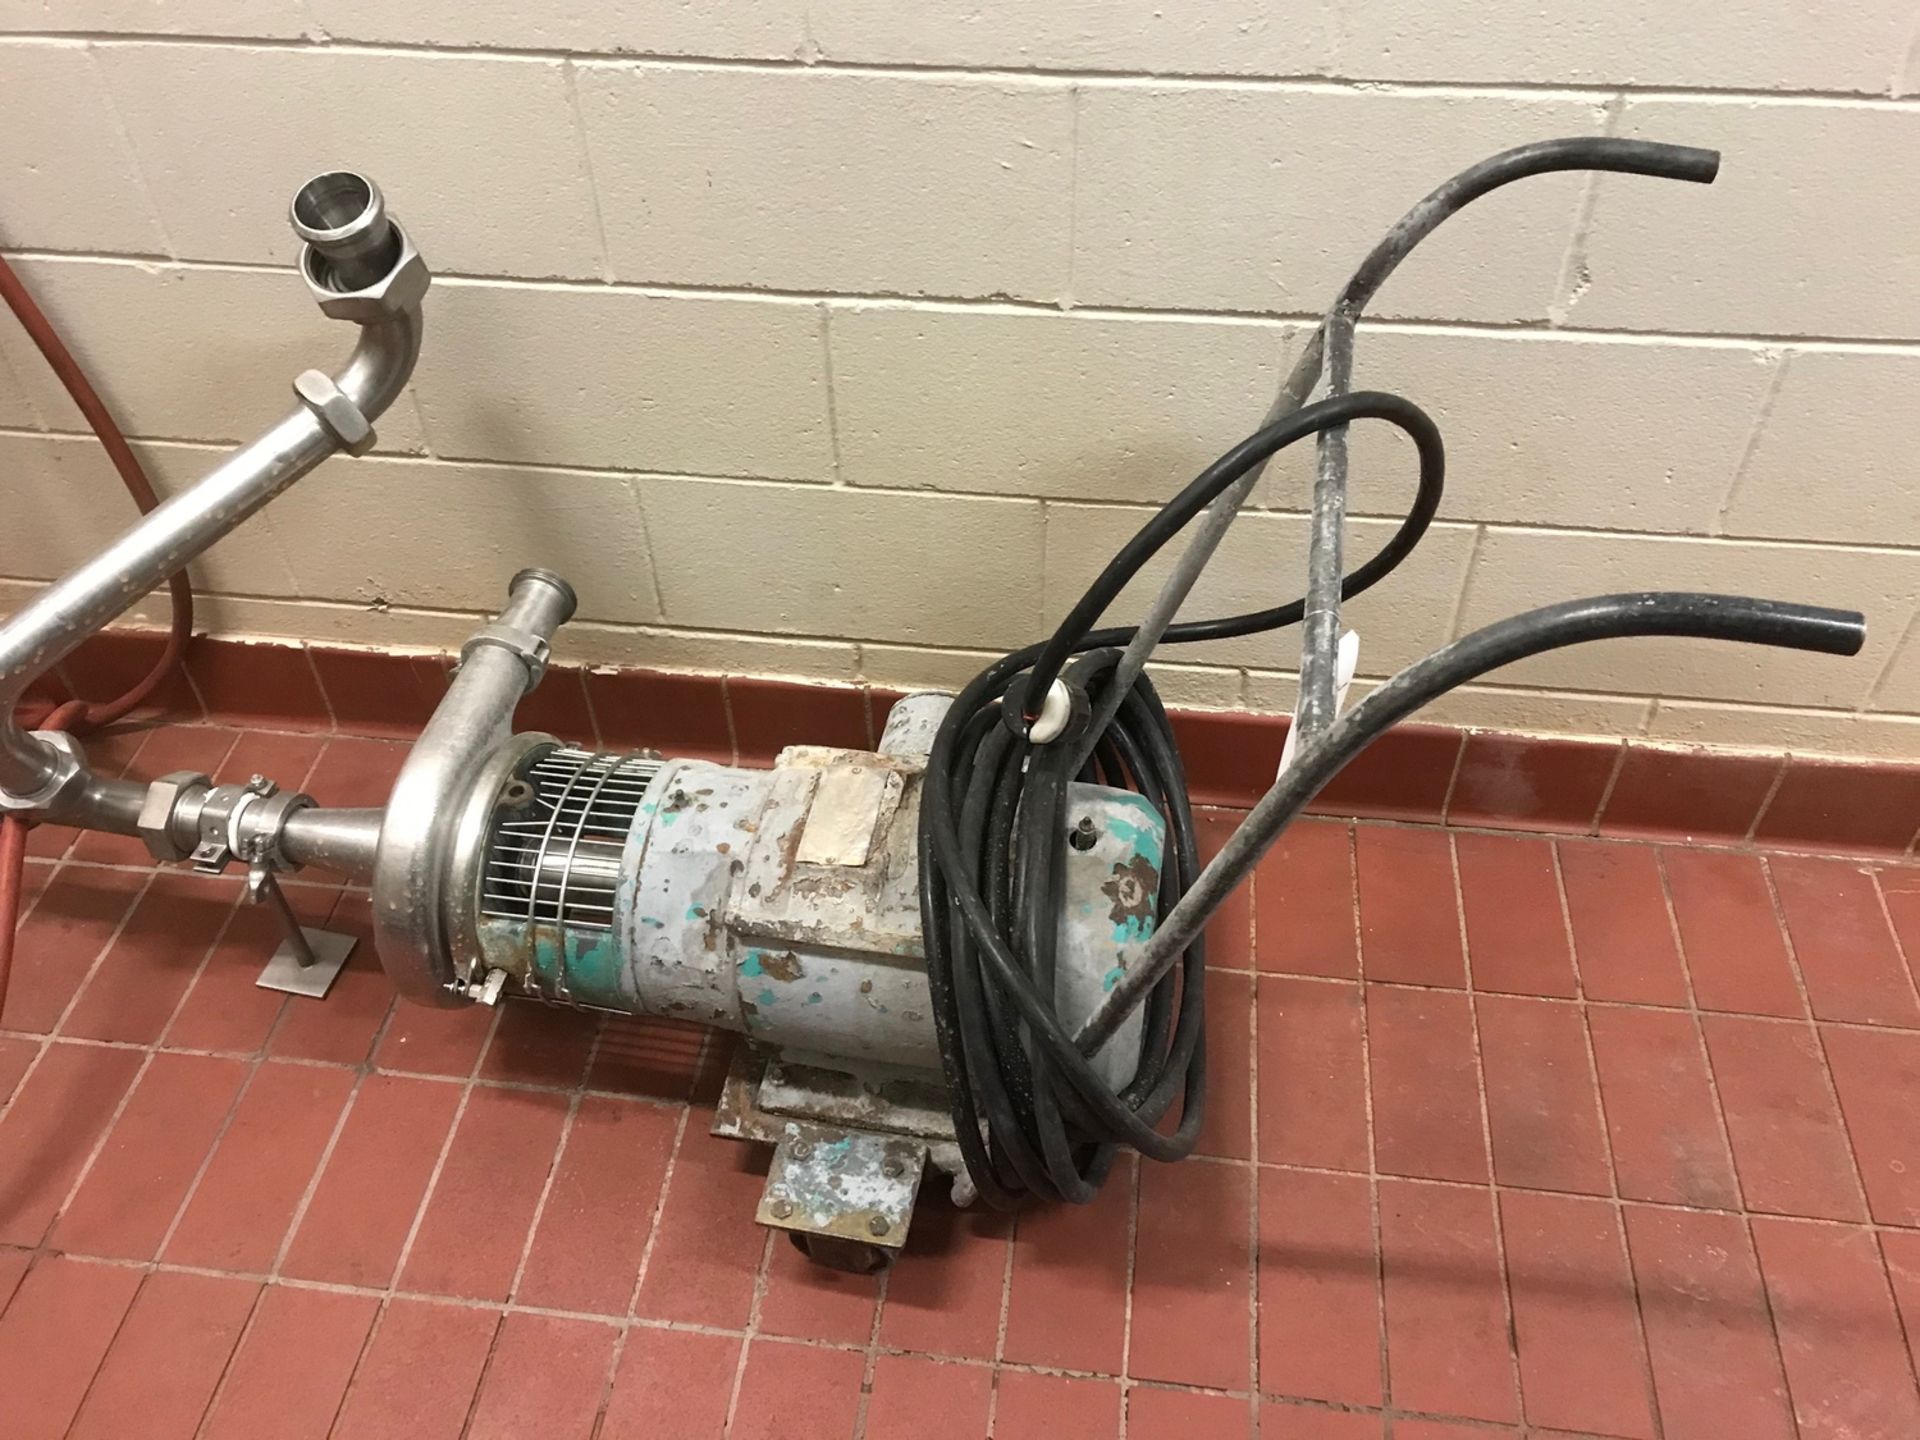 Portable Stainless Steel Centrifugal Pump, 3" inlet, 2" outlet, 7.5 HP - Image 2 of 2